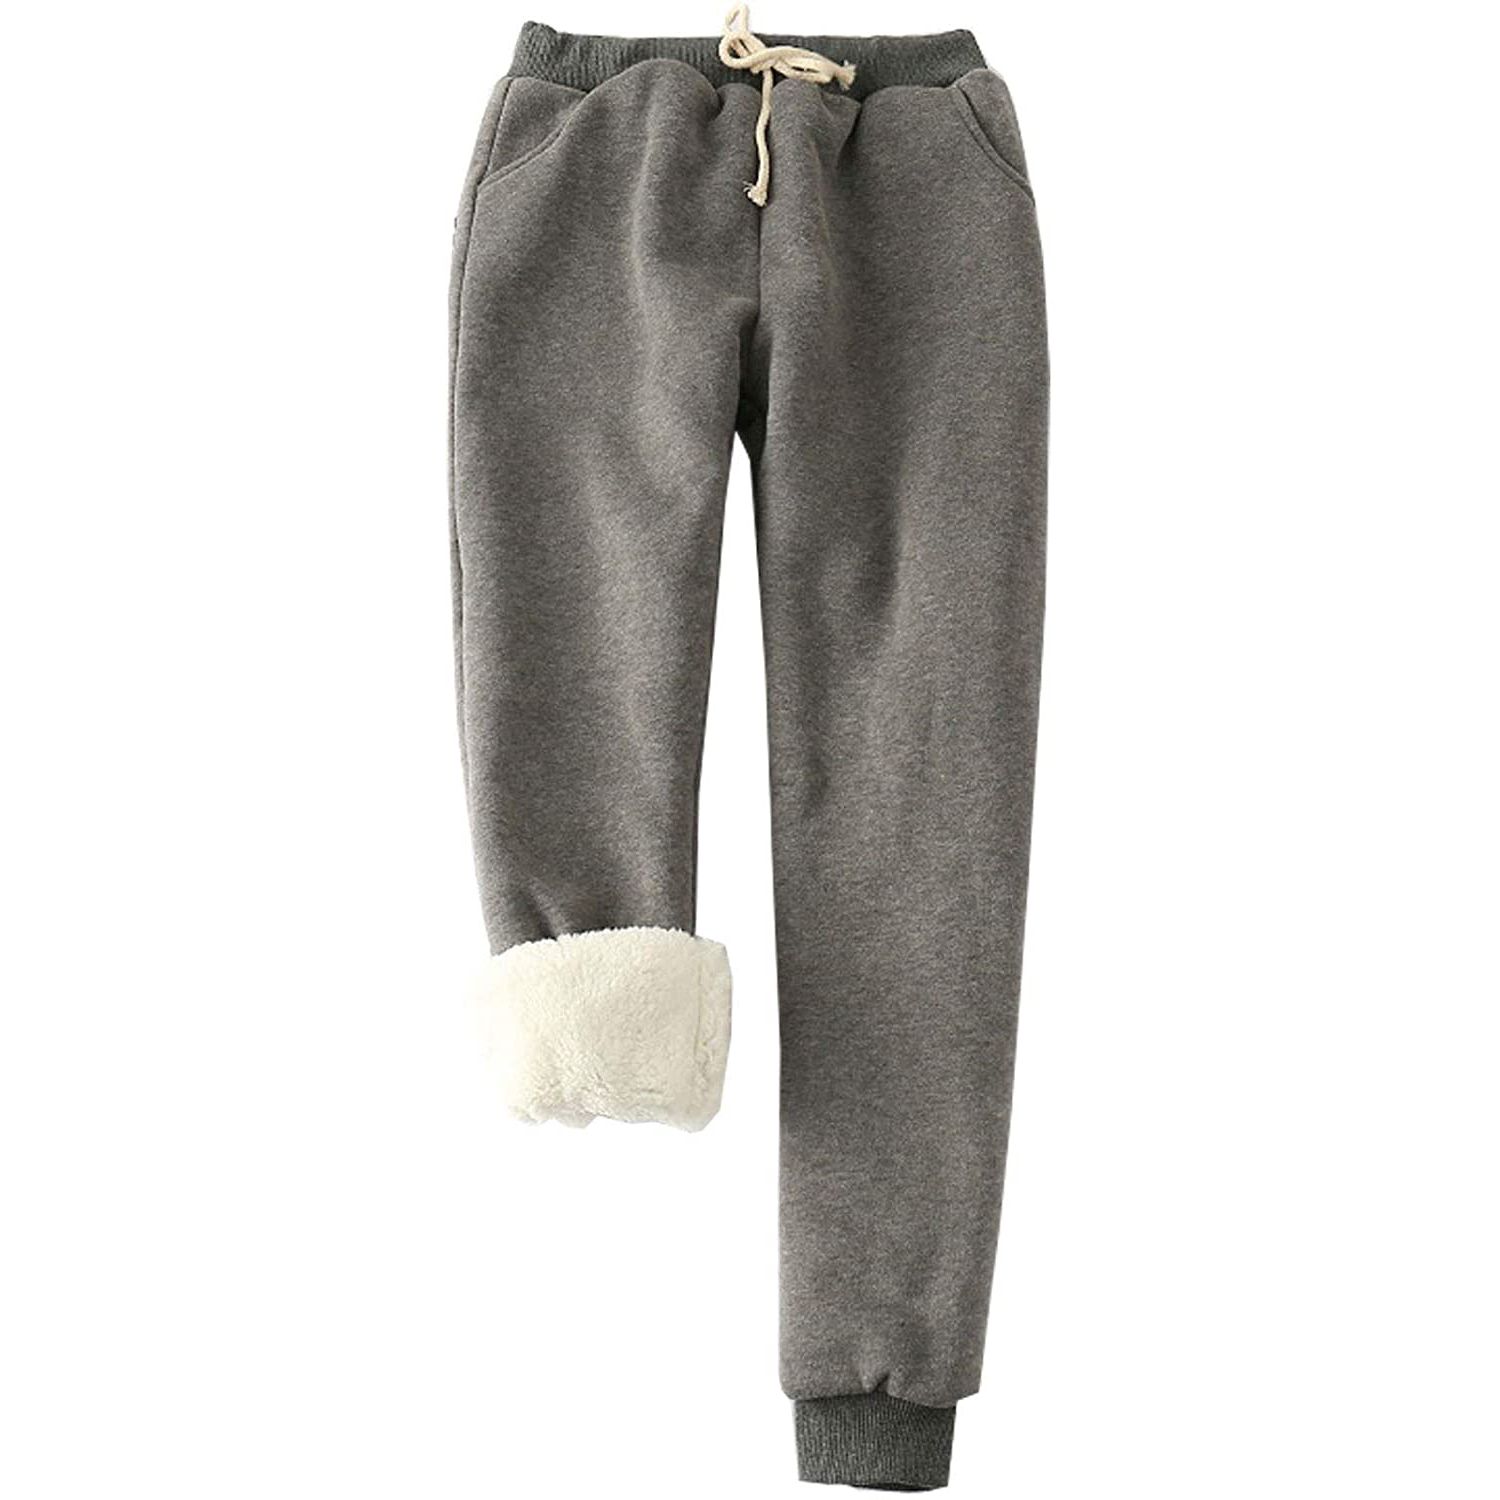 Shop These Customer-Loved Fleece-Lined Joggers from Amazon | PEOPLE.com